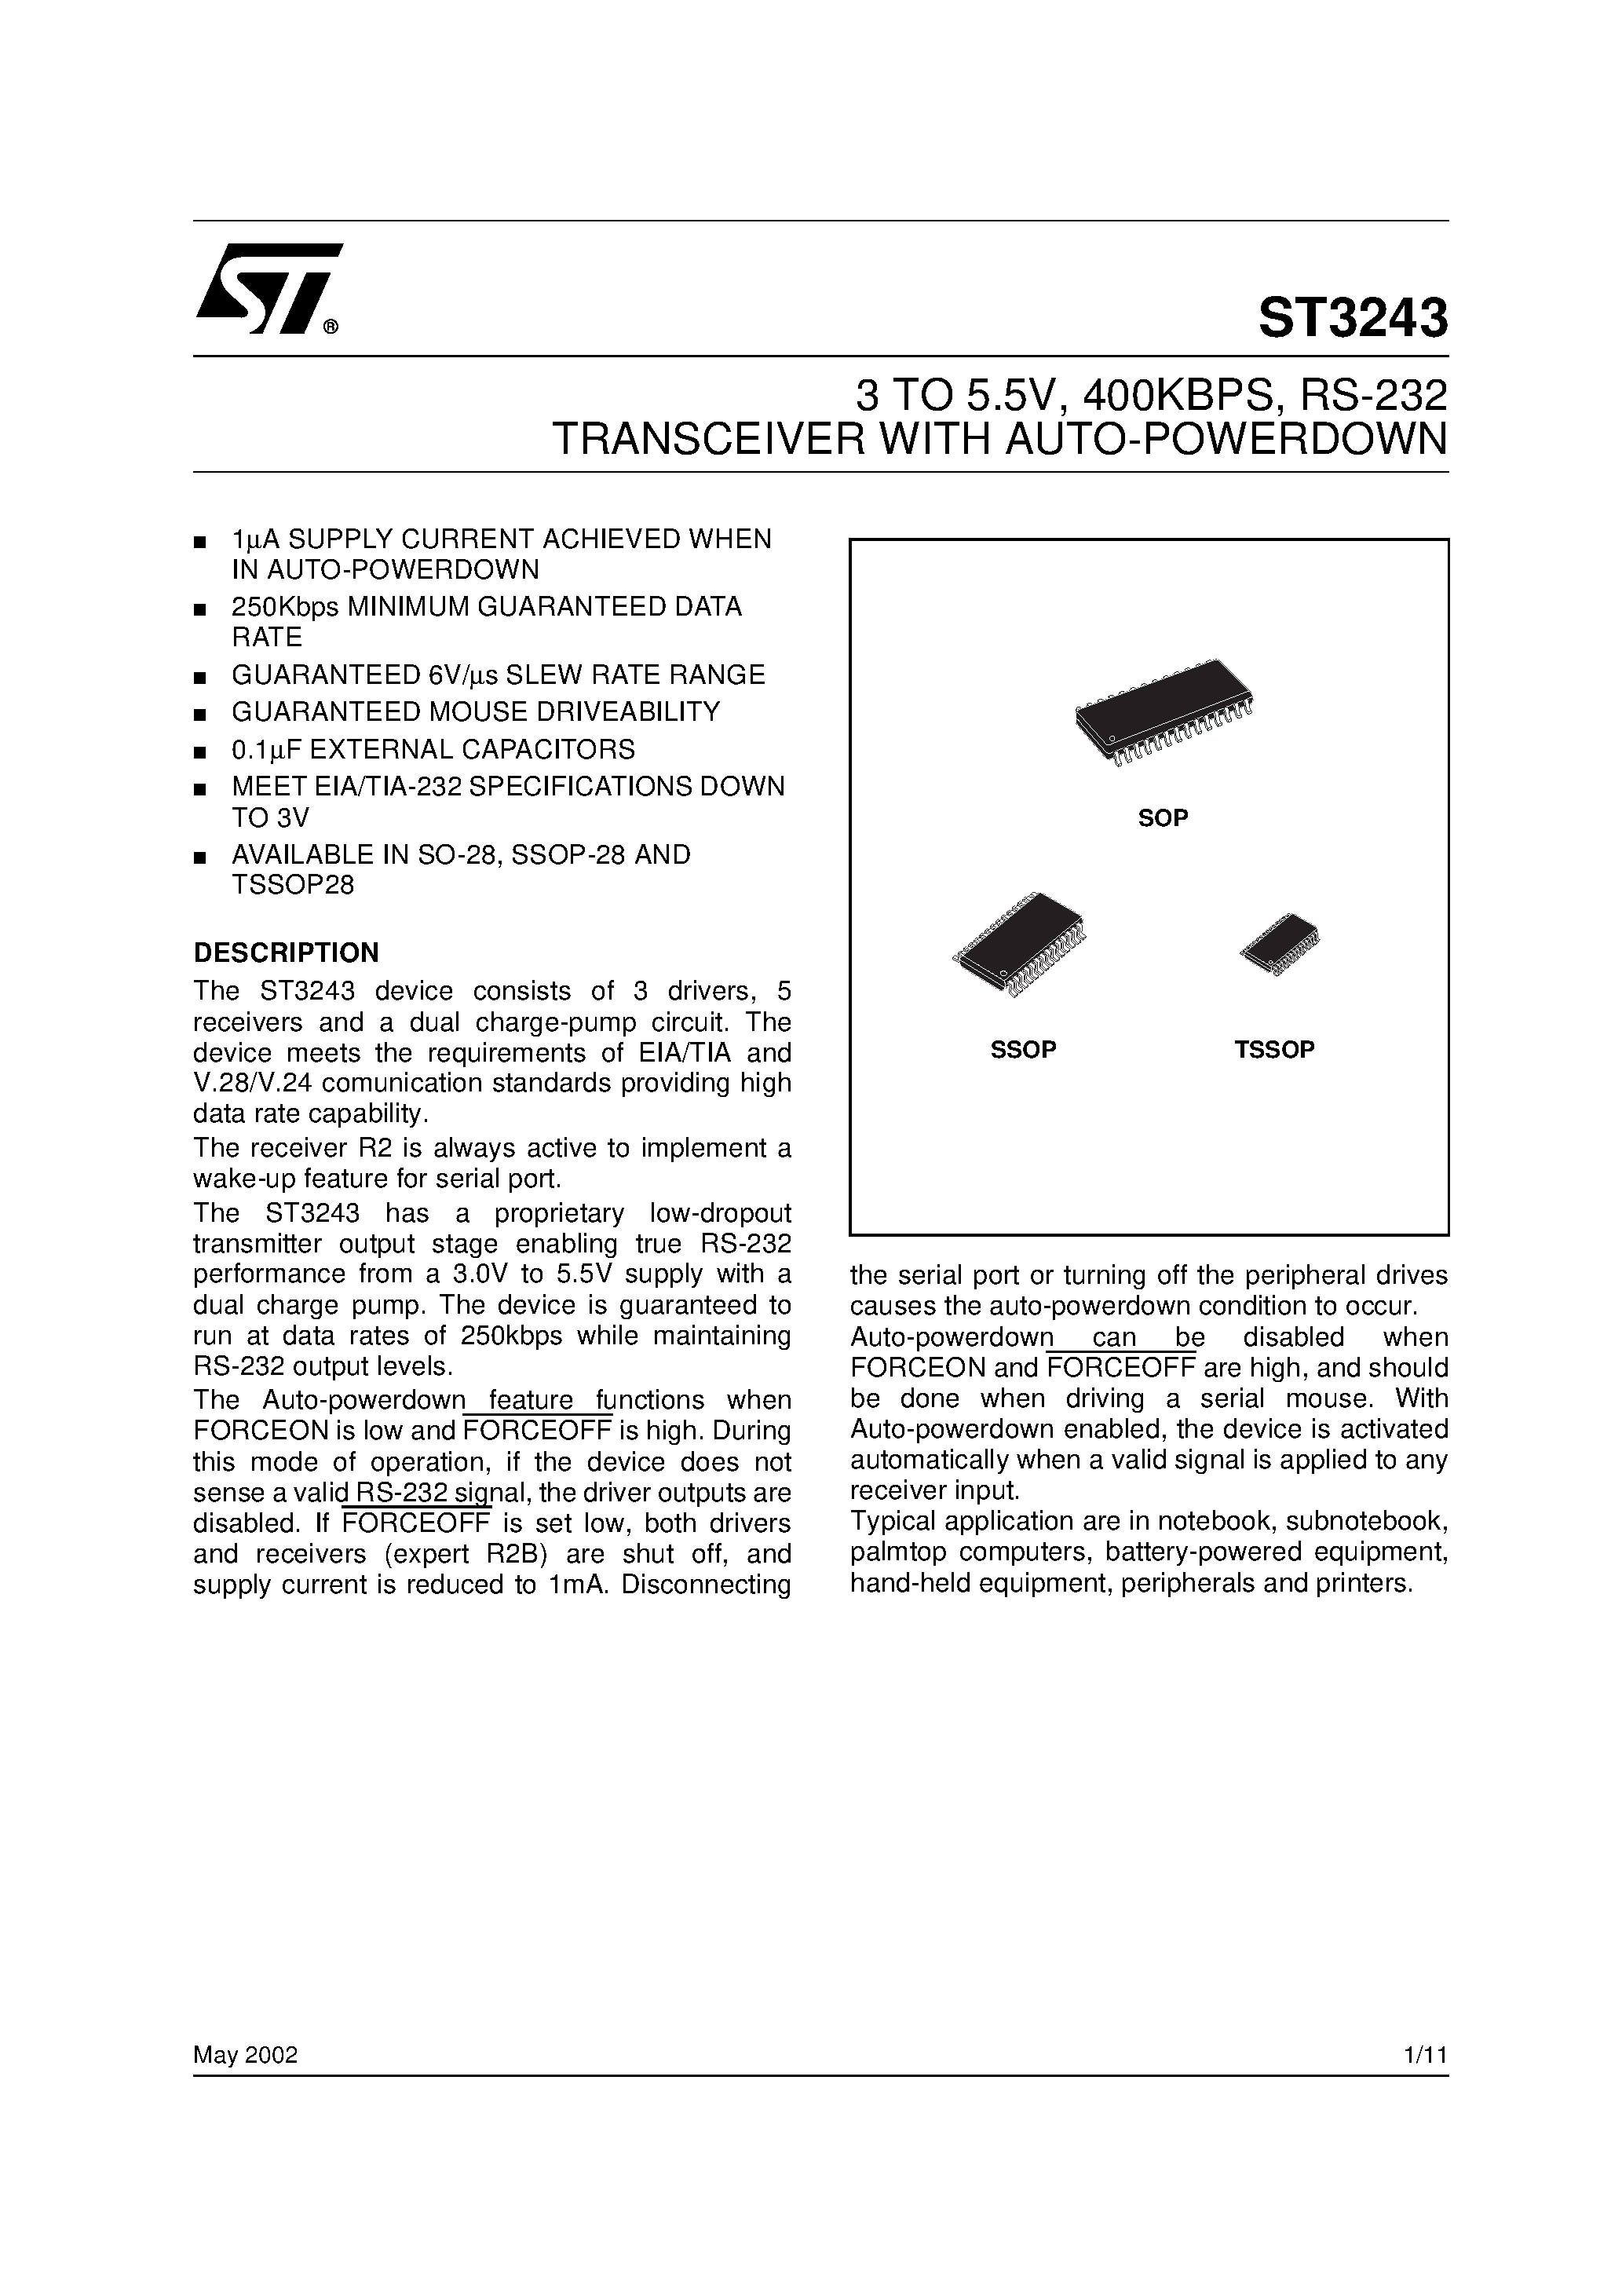 Datasheet ST3243 - RS-232 TRANSCEIVER WITH AUTO-POWERDOWN page 1